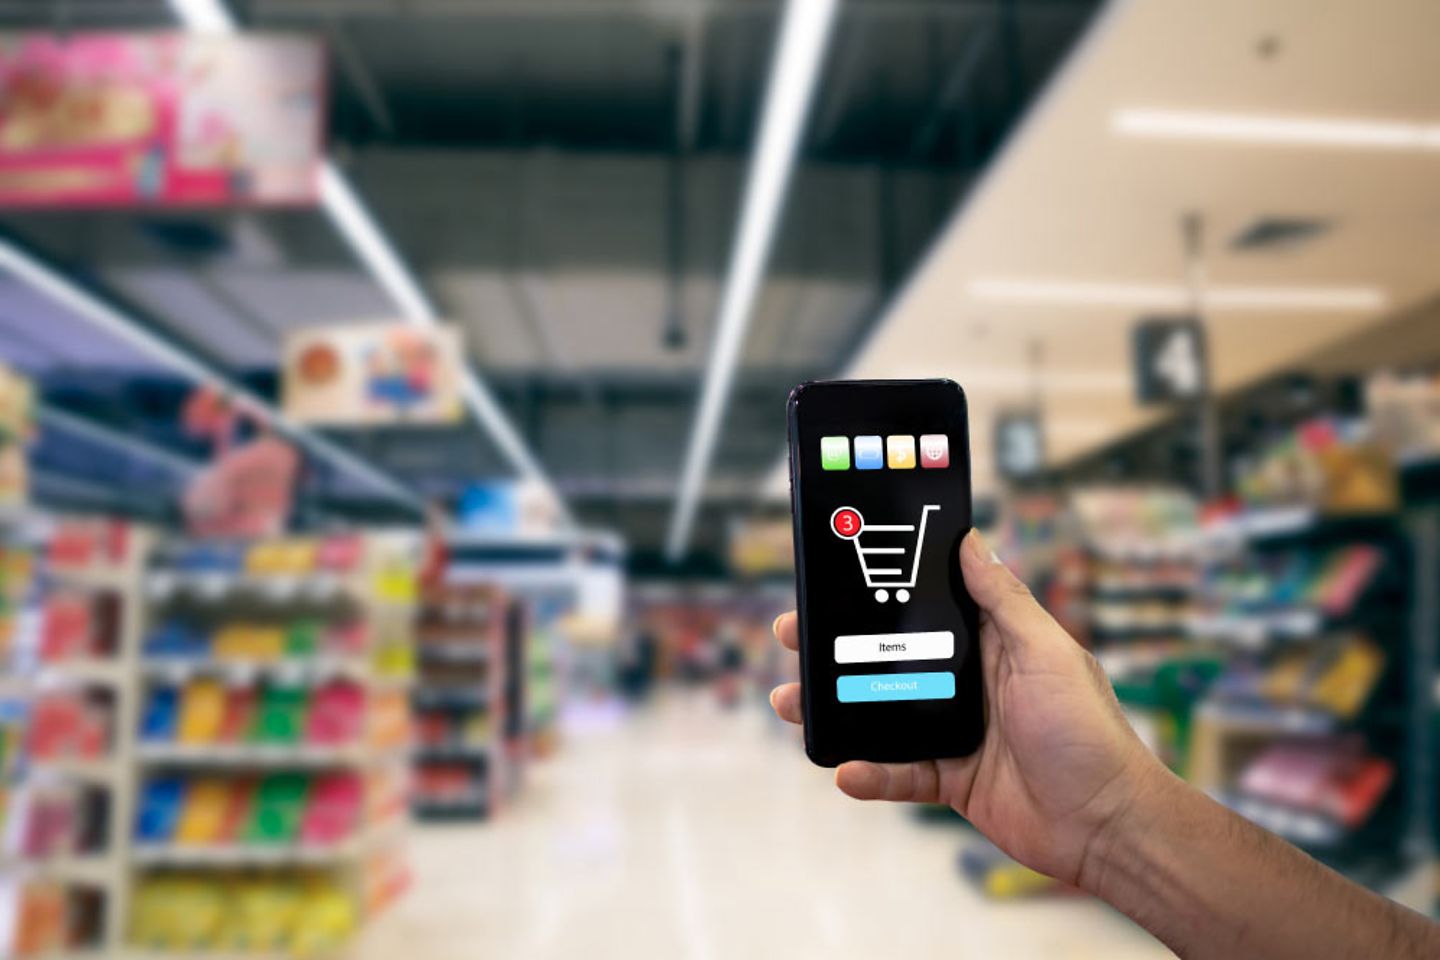 One hand holds a smartphone showing a shopping cart, in the background are supermarket shelves